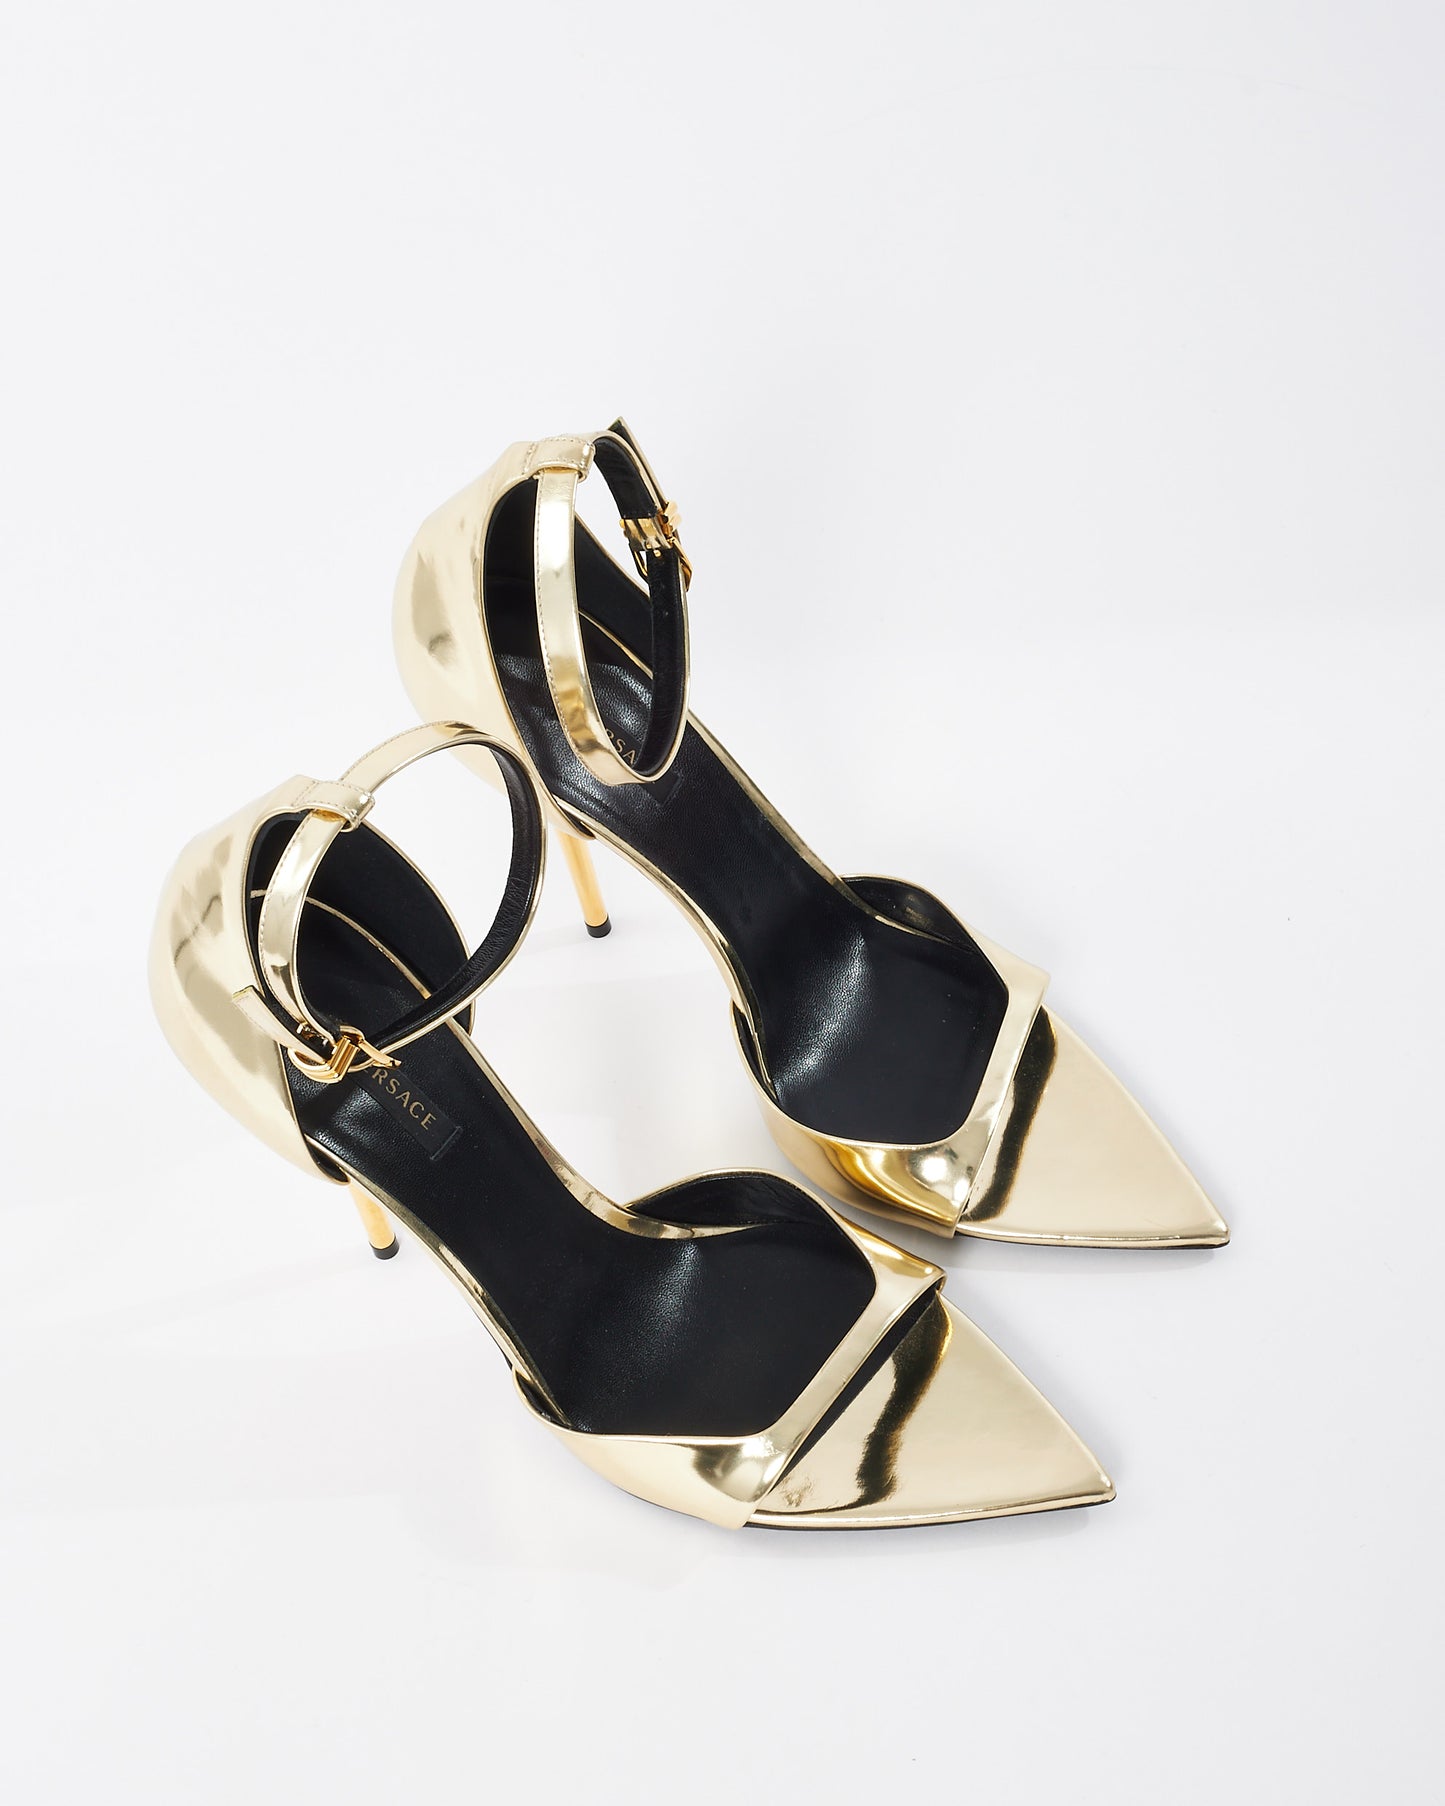 Versace Gold Patent Leather Ankle Strap Stiletto Sandals - 41